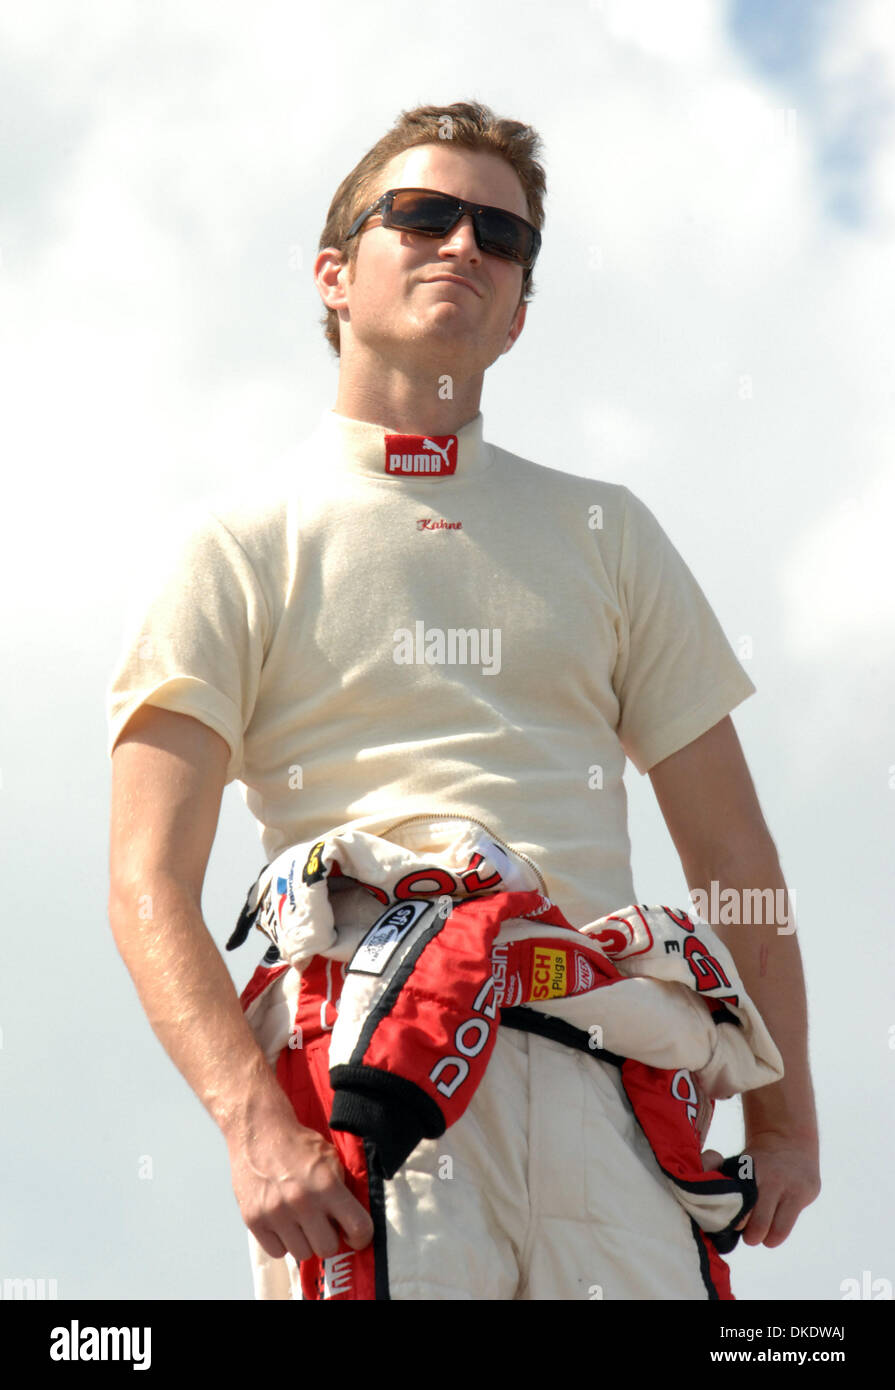 May 11, 2007 - Darlington, SC, USA - Nascar Nextel Cup Driver KASEY KAHNE watches other drivers from the top of his hauler during qualifying for the Dodge Avenger 500 that is taking place at the Darlington Raceway.  (Credit Image: © Jason Moore/ZUMA Press) Stock Photo